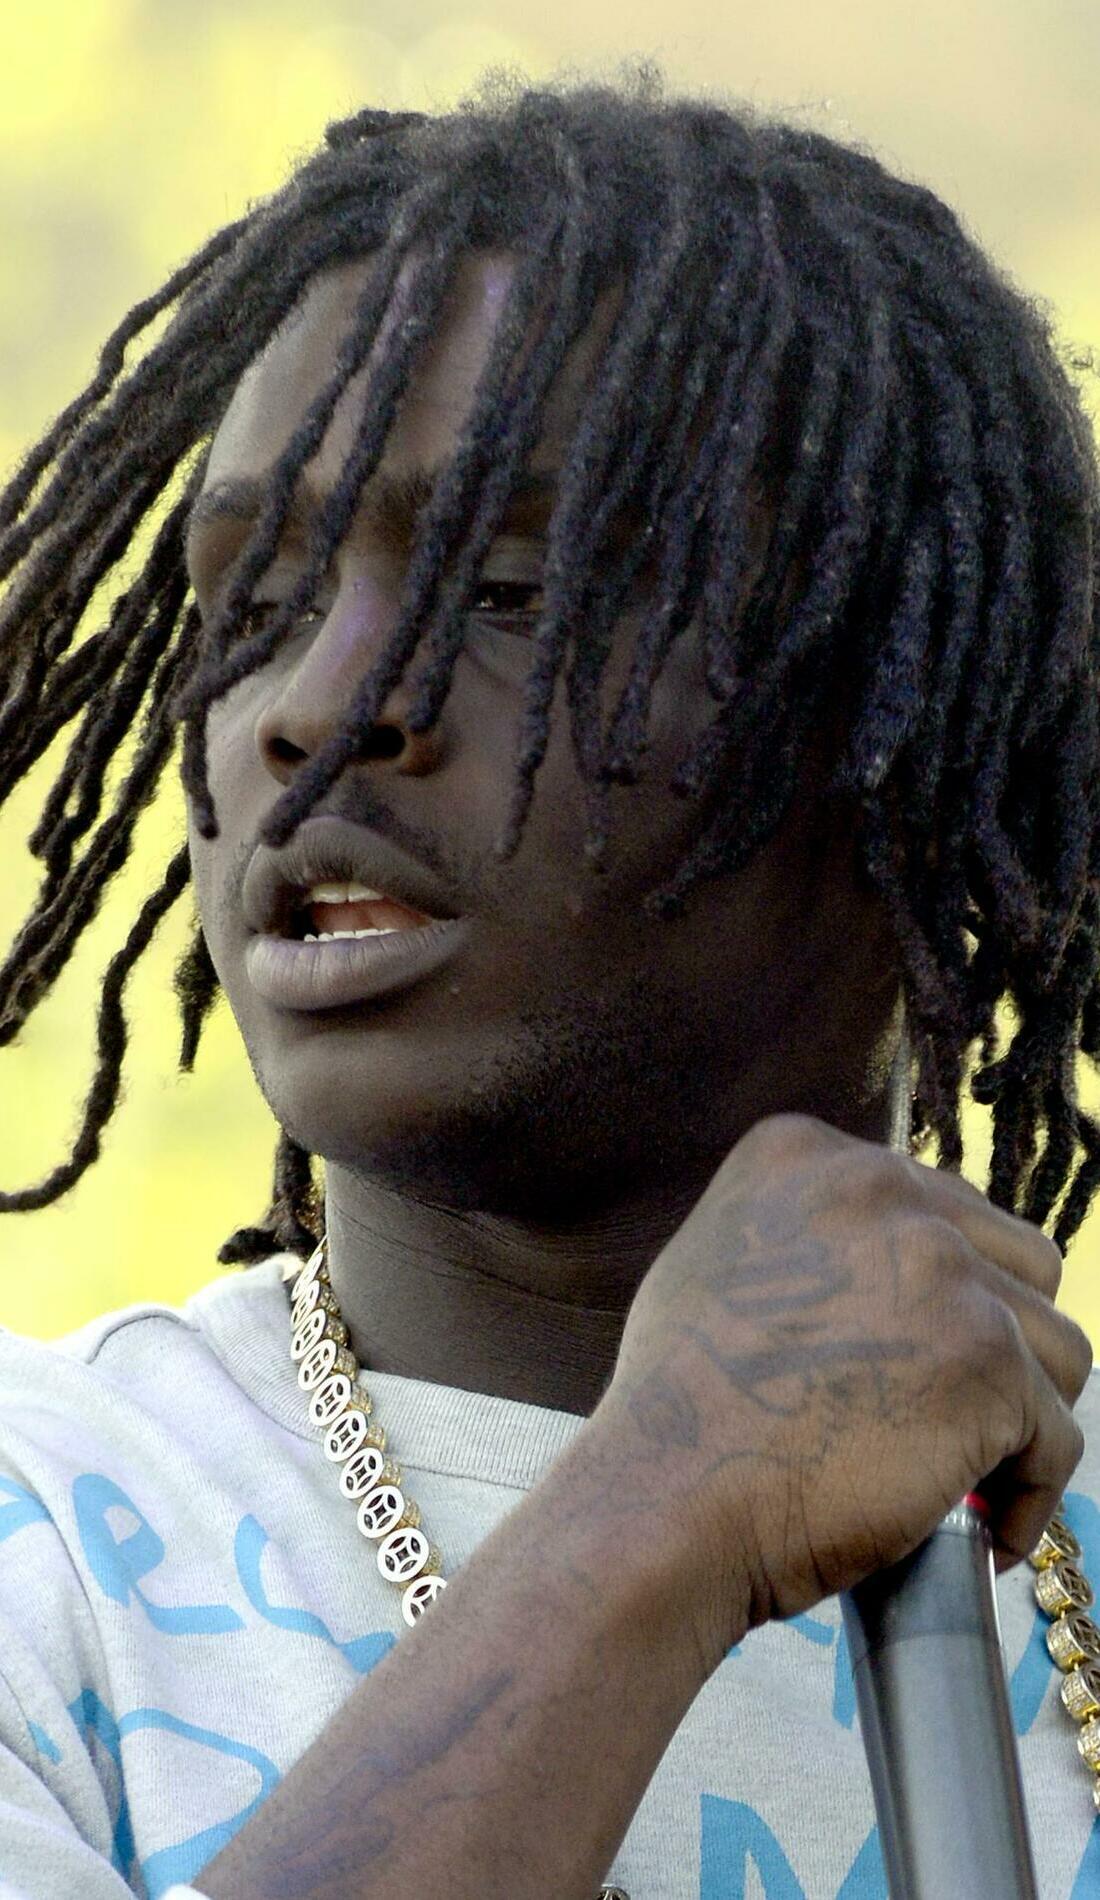 Chief Keef in Kansas City, 2023 Concert Tickets